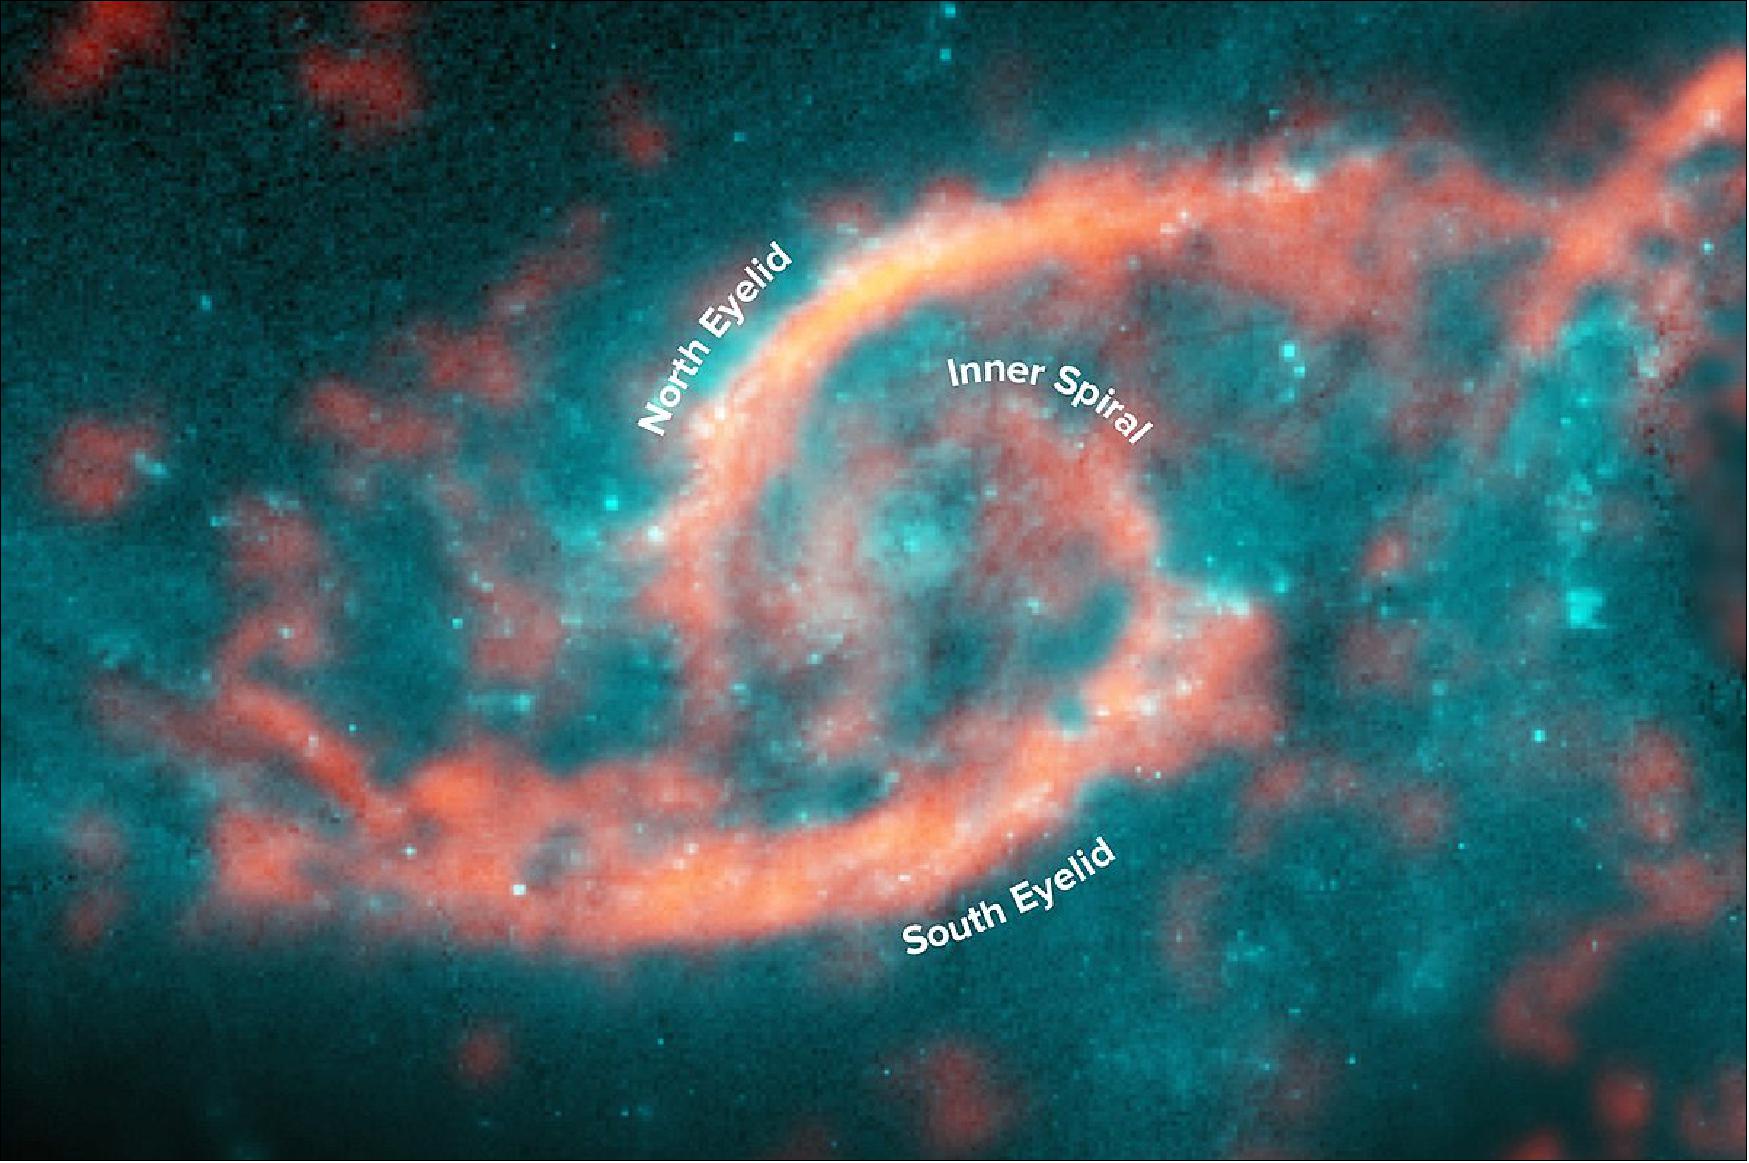 Figure 68: Annotated image showing dazzling eyelid-like features bursting with stars in galaxy IC 2163 formed from a tsunami of stars and gas triggered by a glancing collision with galaxy NGC 2207 (a portion of its spiral arm is shown on right side of image). ALMA image of carbon monoxide (orange), which revealed motion of the gas in these features, is shown on top of Hubble image (blue) of the galaxy (image credit: M. Kaufman; B. Saxton (NRAO/AUI/NSF); ALMA (ESO/NAOJ/NRAO); NASA/ESA Hubble Space Telescope)